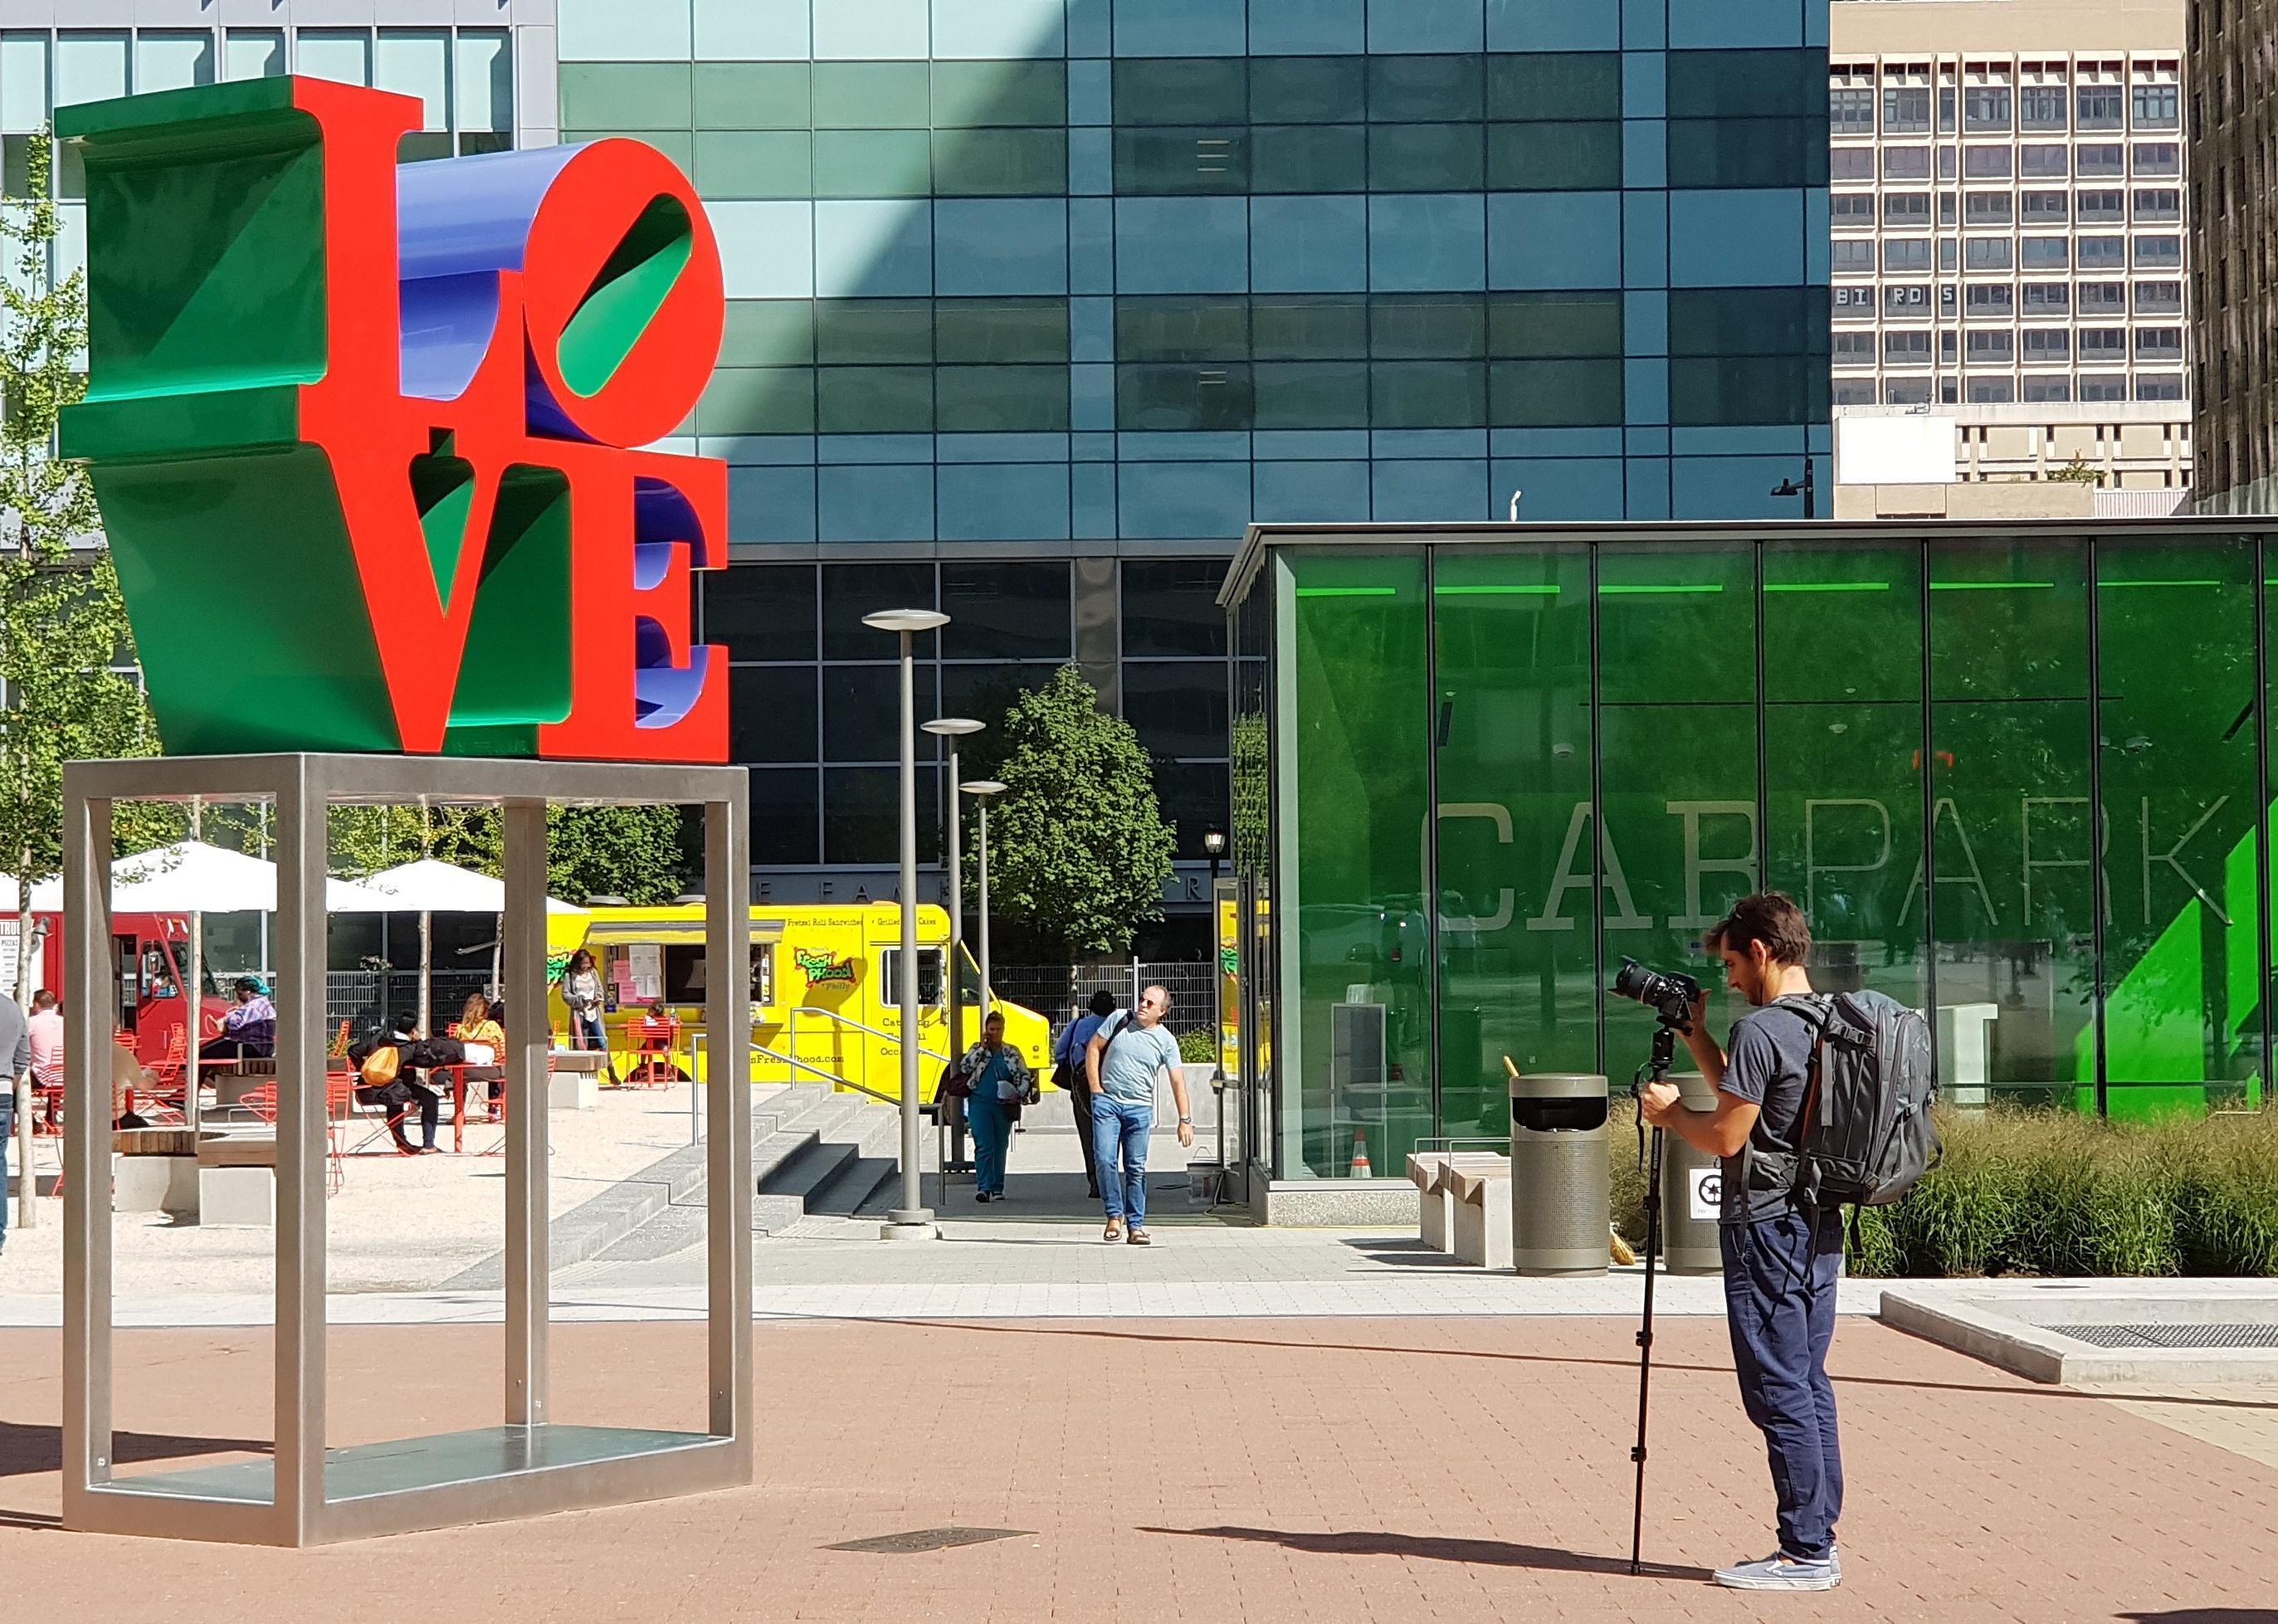 A person taking a photo of a "Love" sign in Philadelphia.